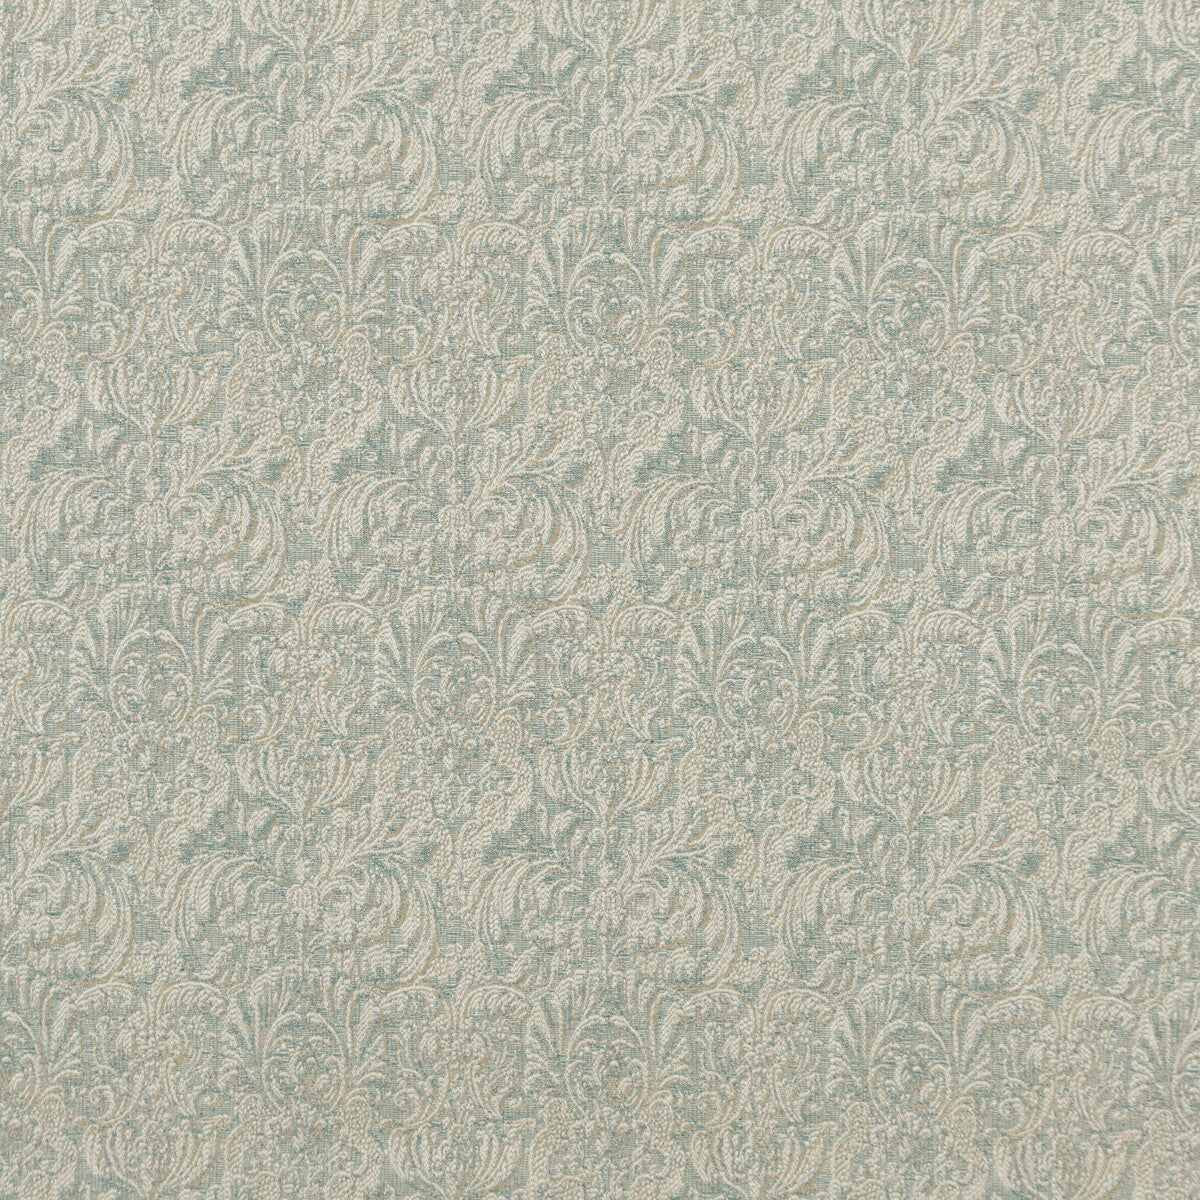 Vintage Damask fabric in aqua color - pattern BF10725.725.0 - by G P &amp; J Baker in the Vintage Textures collection